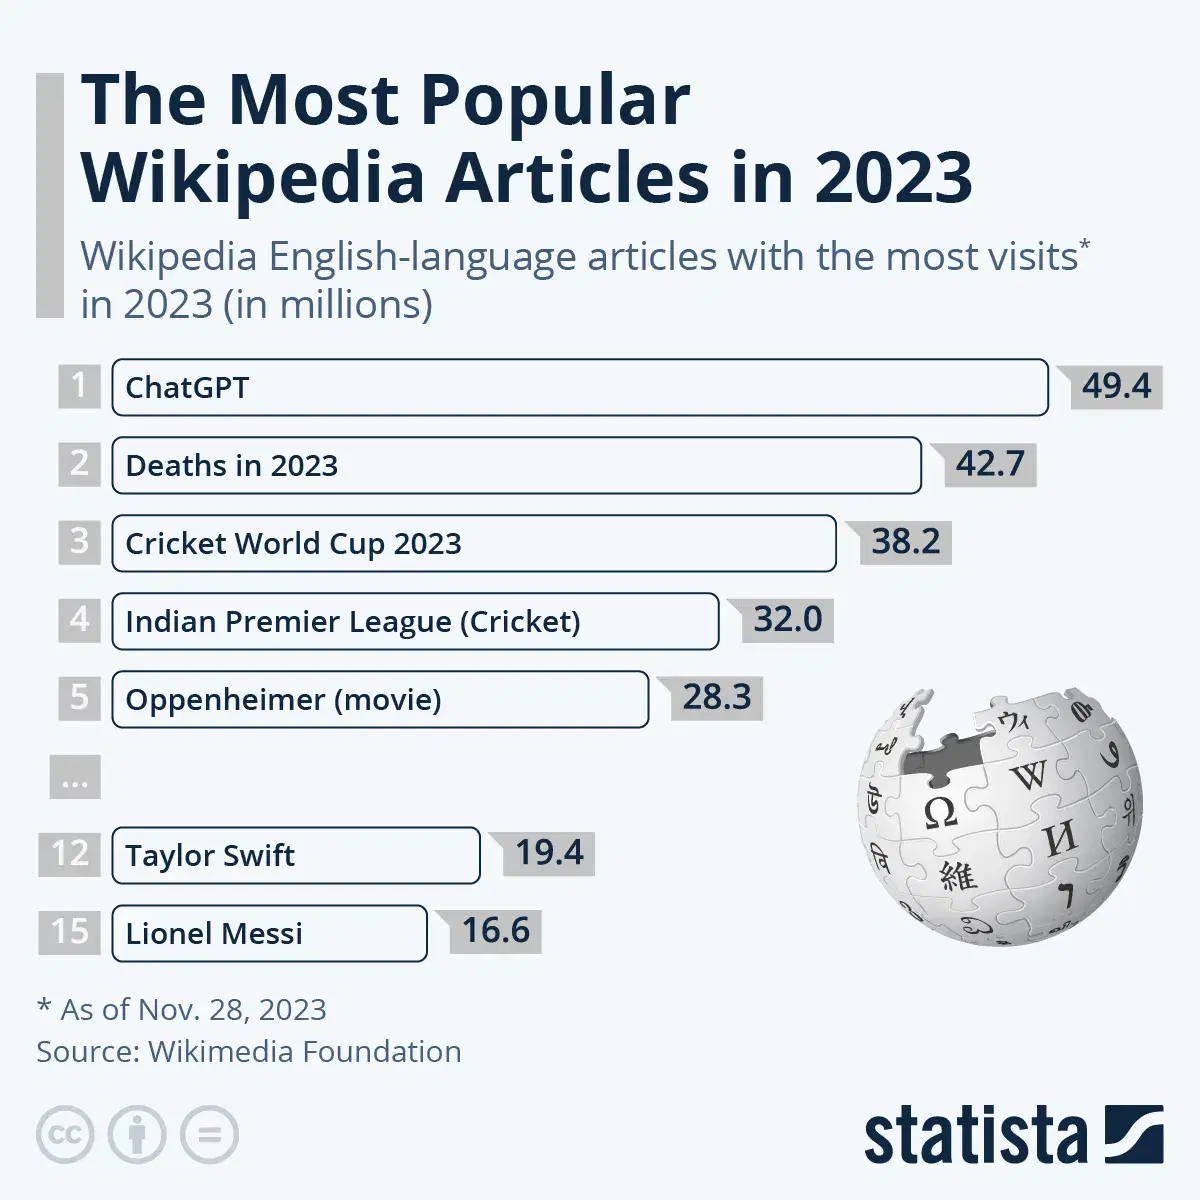 The Most Popular Wikipedia Articles in 2023